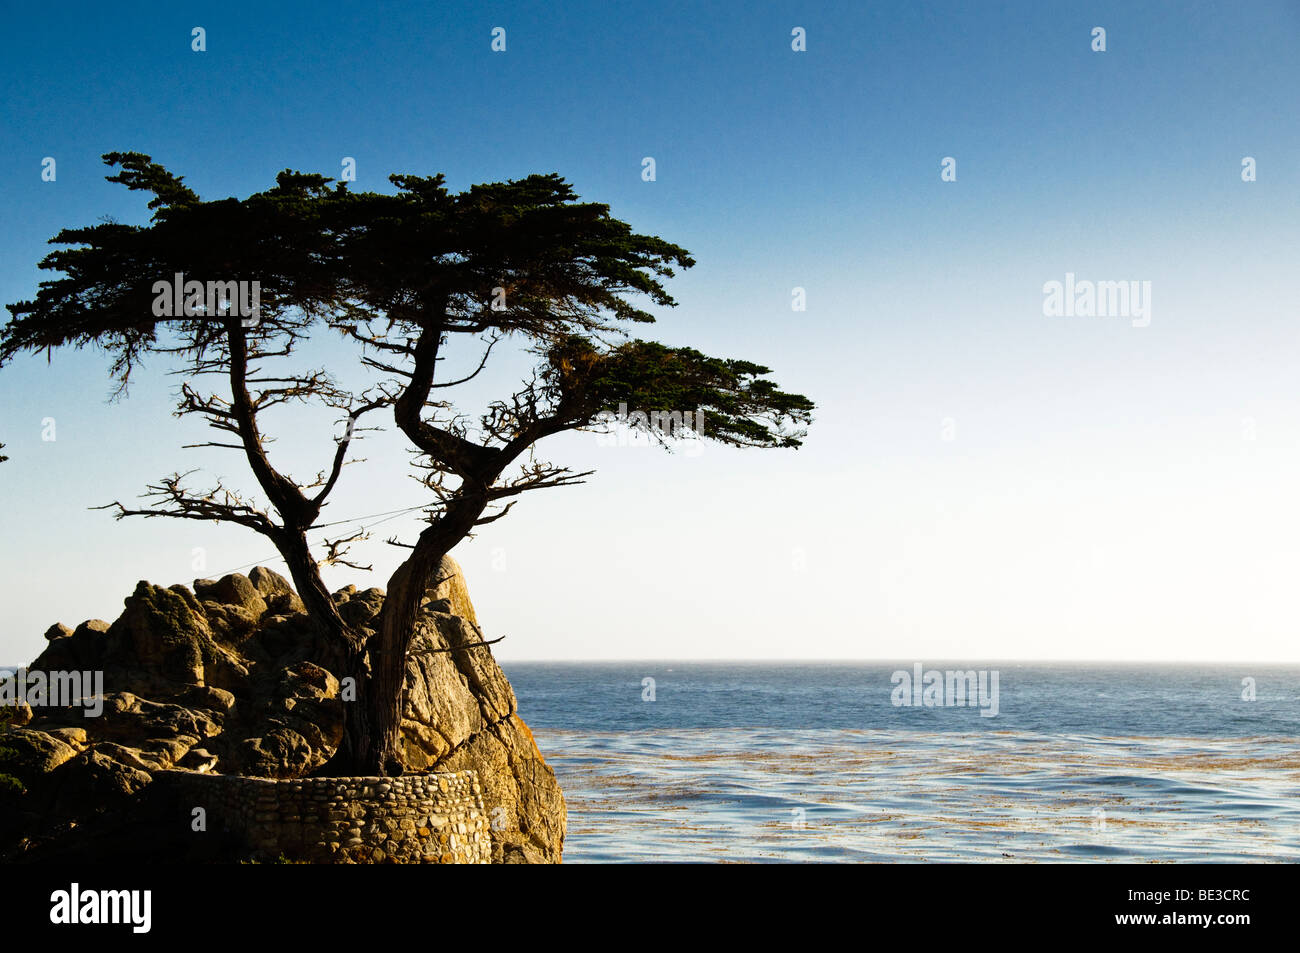 The Lone Cypress Tree at Pebble Beach on 17 Mile Drive, Pacific Grove Stock Photo